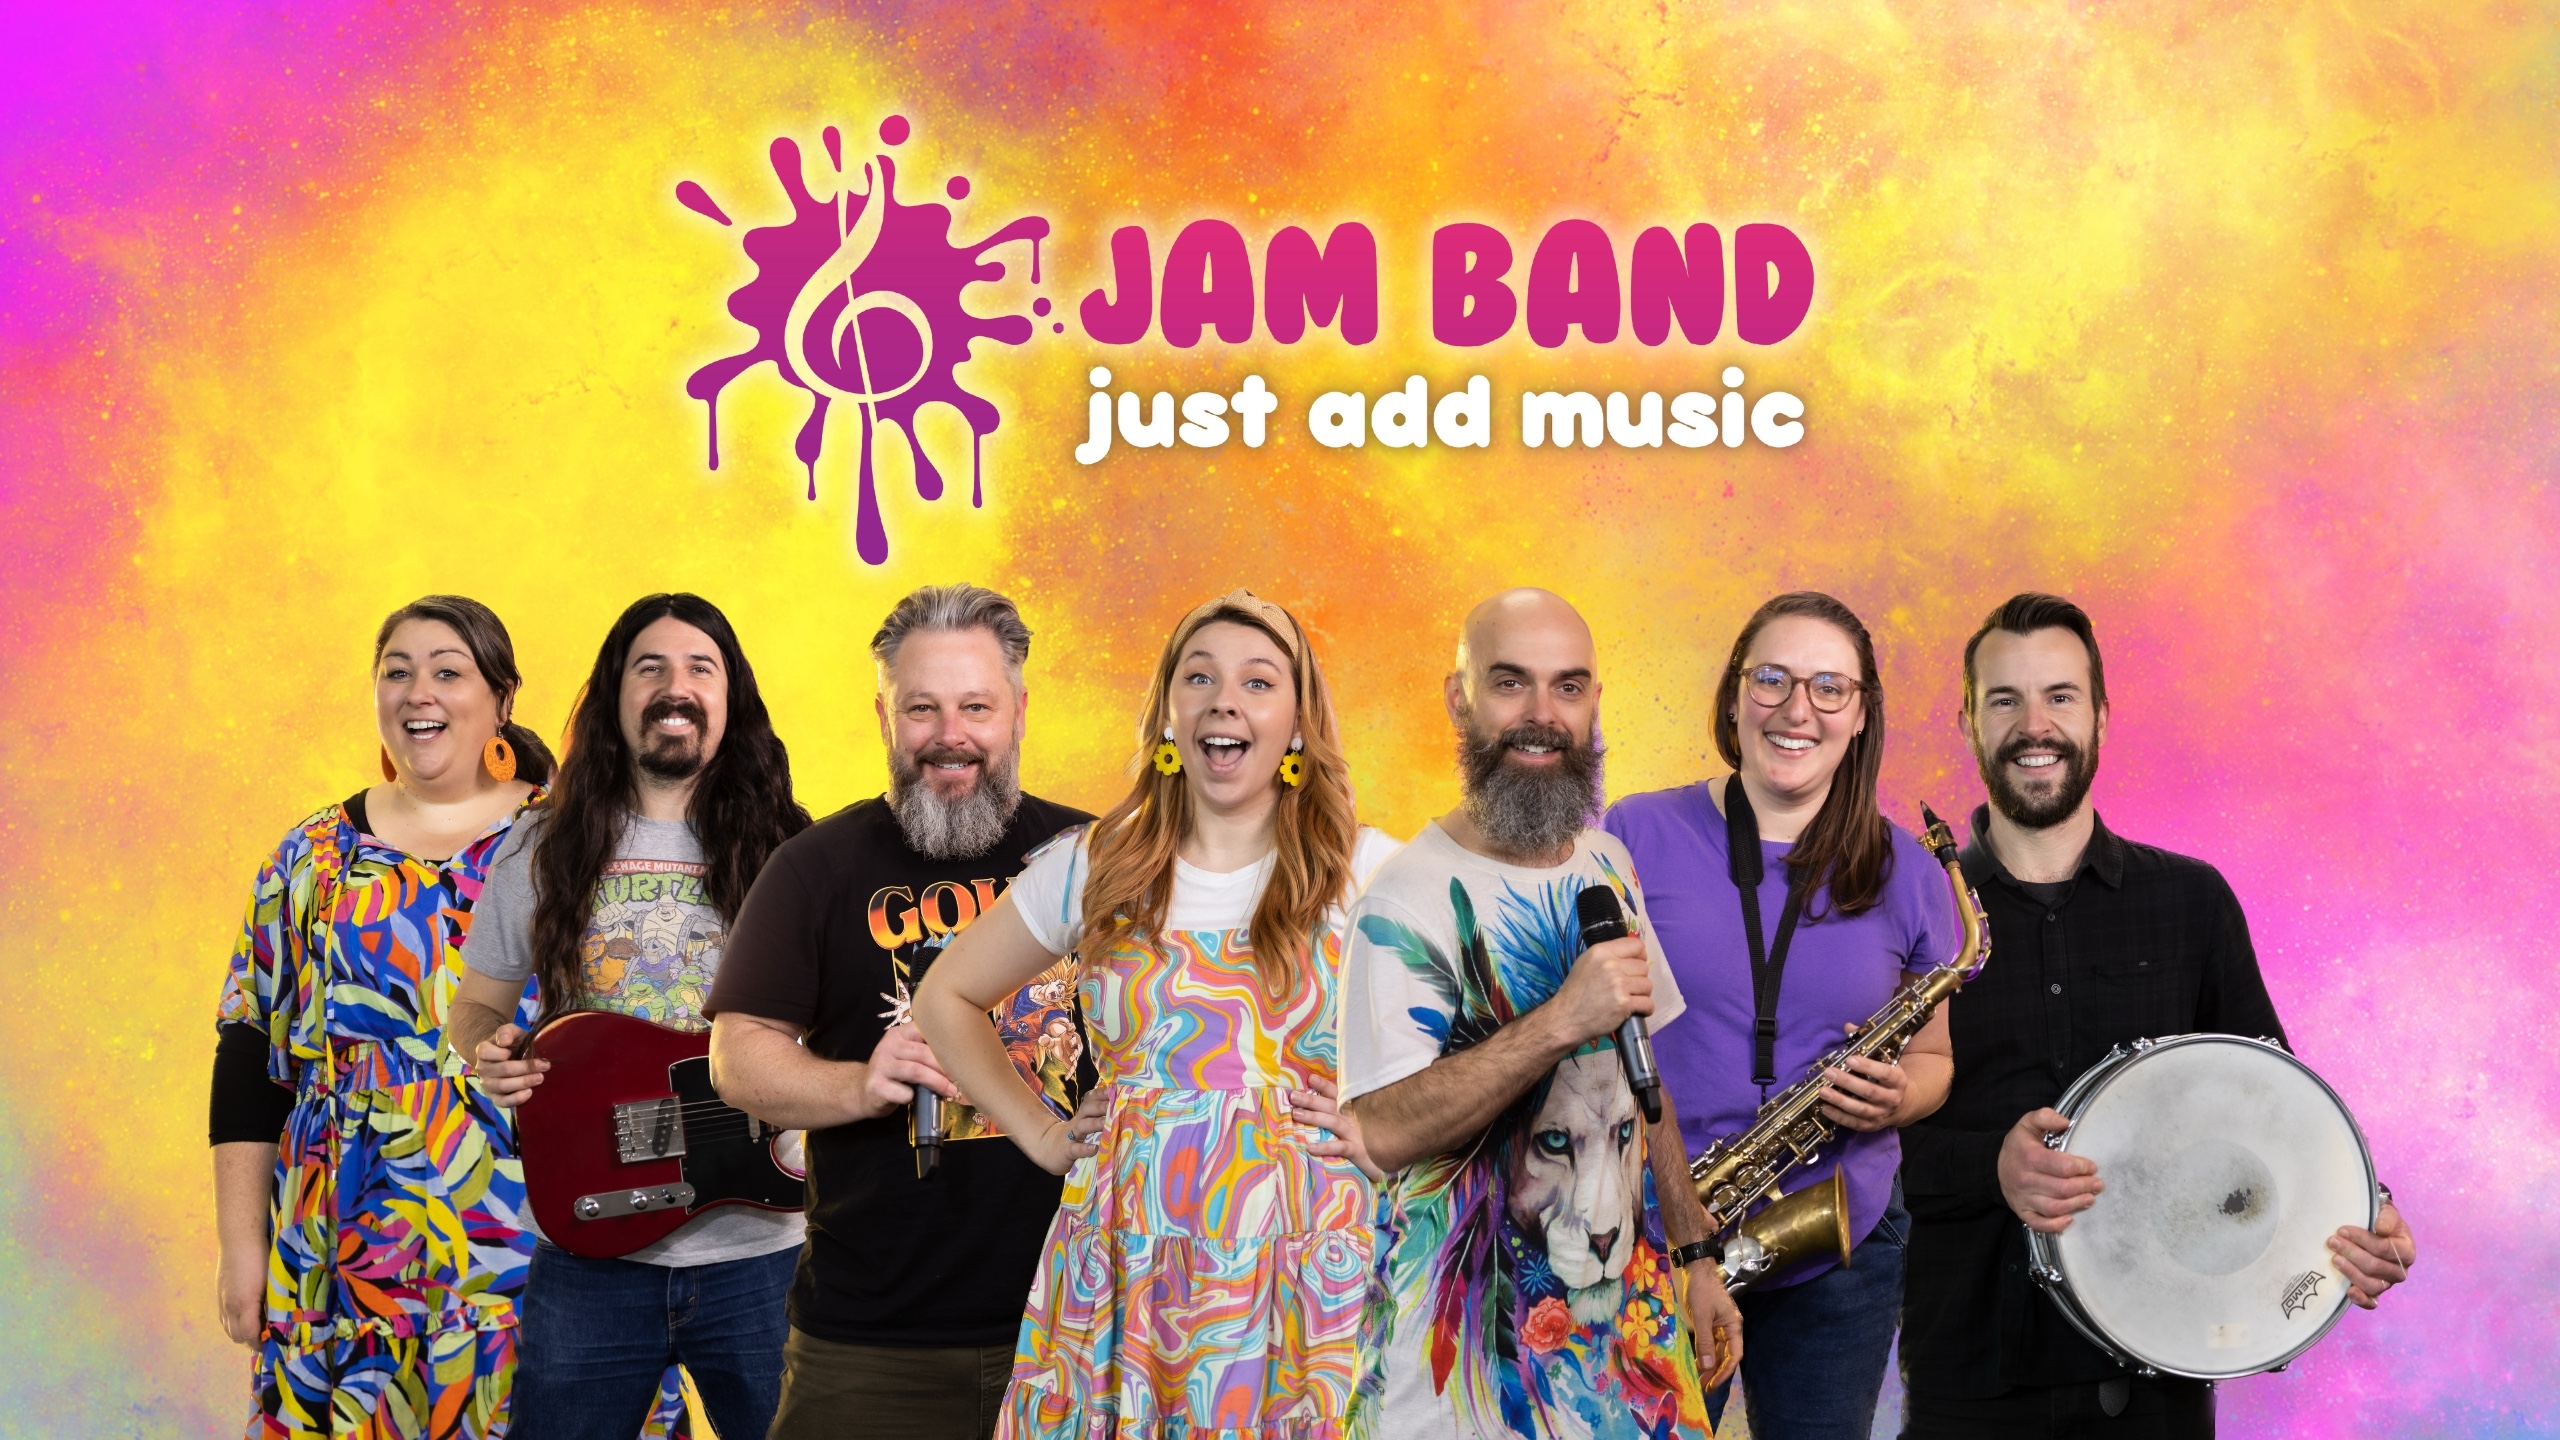 Eve Ormsby Mark Curtis Jono Ruse Mikala Wood Nick Russell Nat Cruse Elijah Maddern JAM Band just add music adelaide south australia saxophone guitar drums microphone